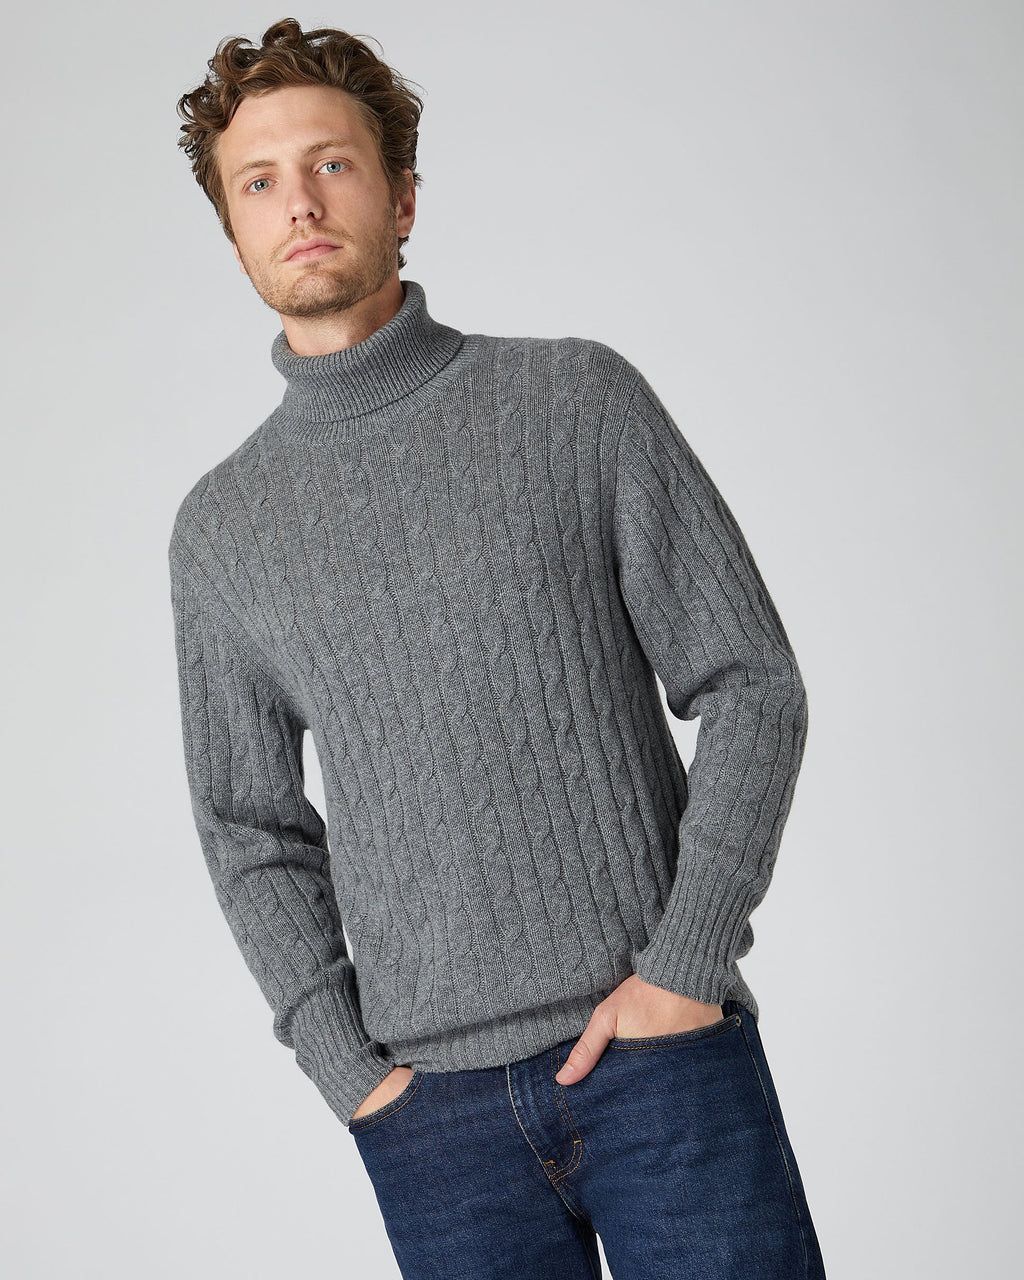 Mens Thick Cashmere Sweater With Slim Fit Turtleneck Mens And Double Collar  For Fall And Winter Slim Fit Knitwear Pullover From Blueberry12, $21.07